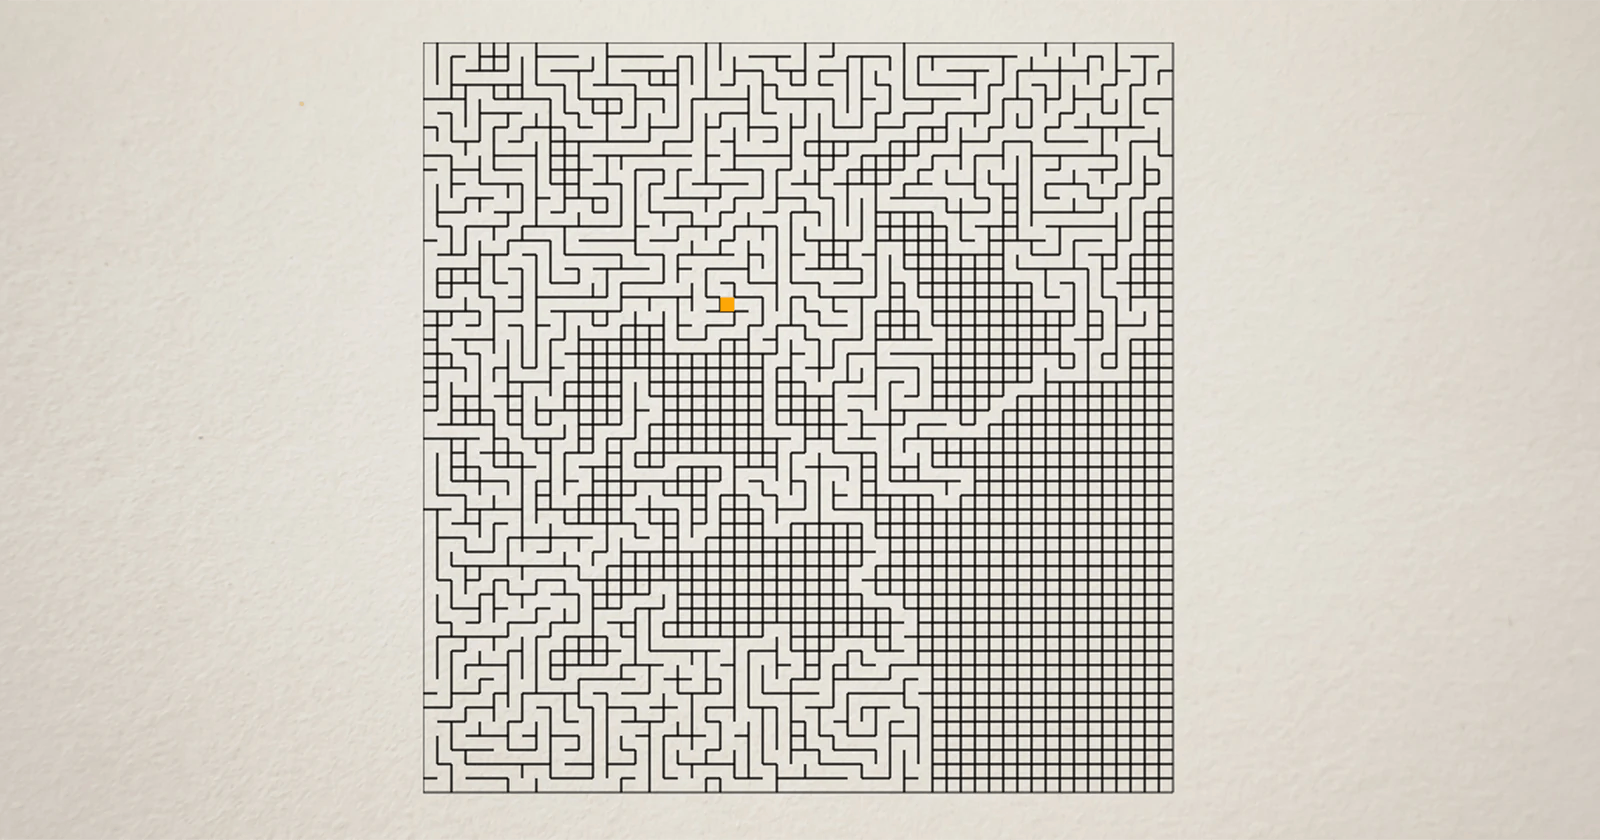 Building Mazes with Depth First Search: How-To Guide